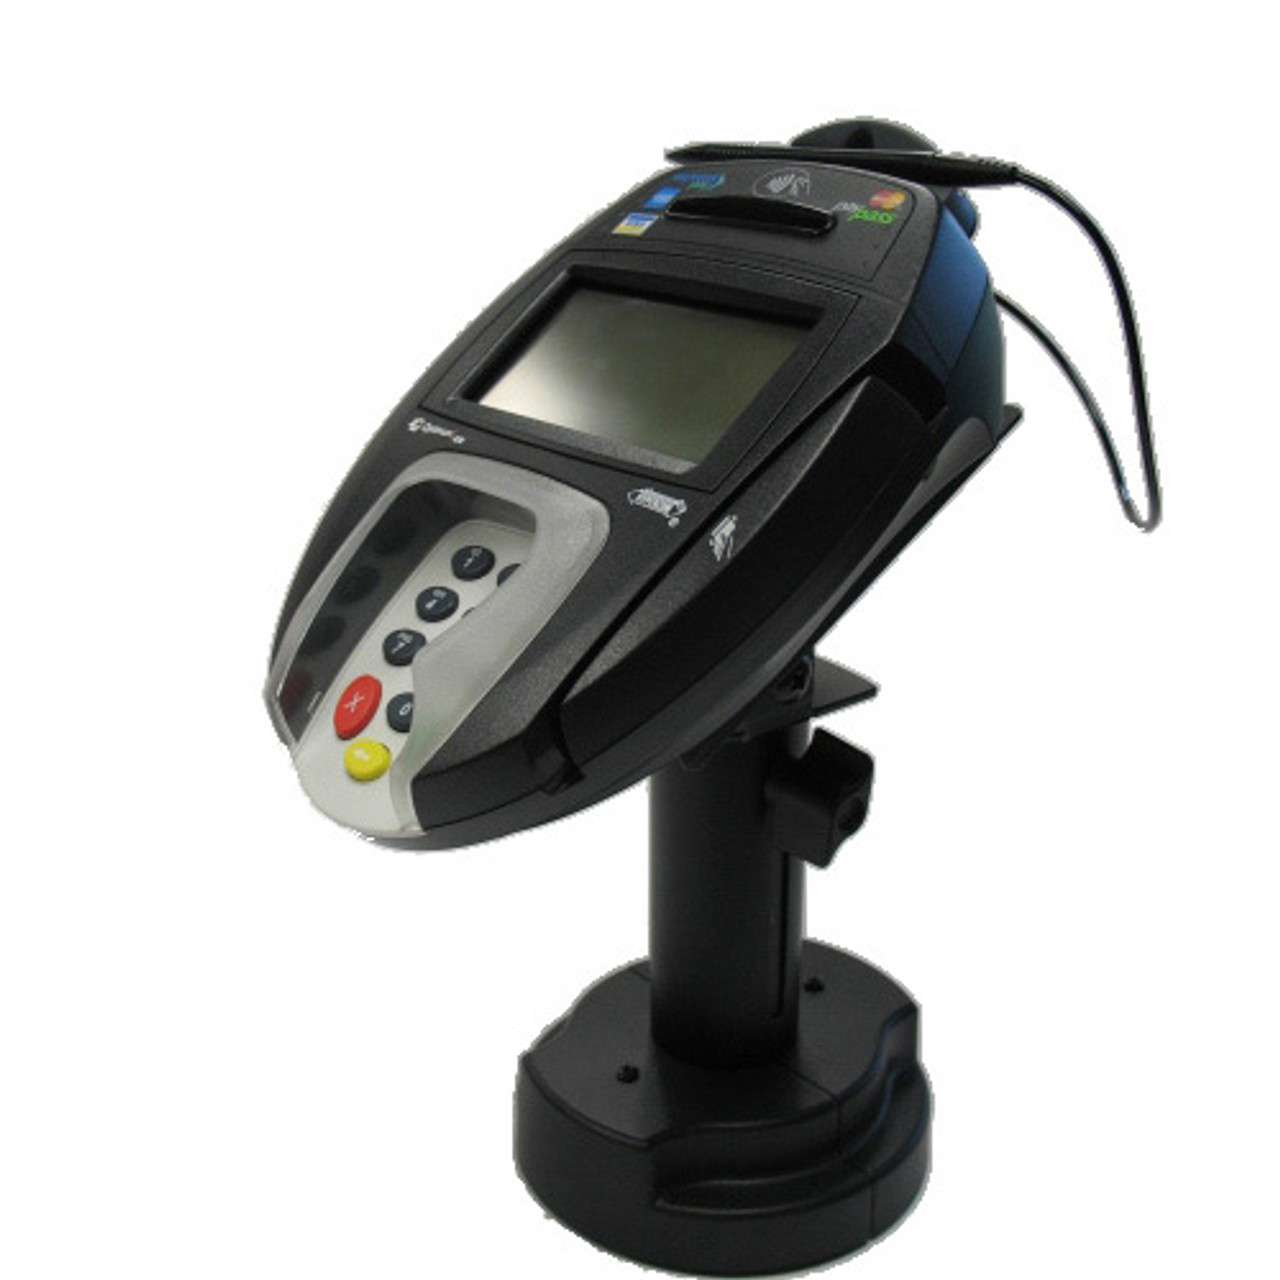 VeriFone Omni 7000 Credit Card Stand Telescoping Pedestal by Swivel Stands